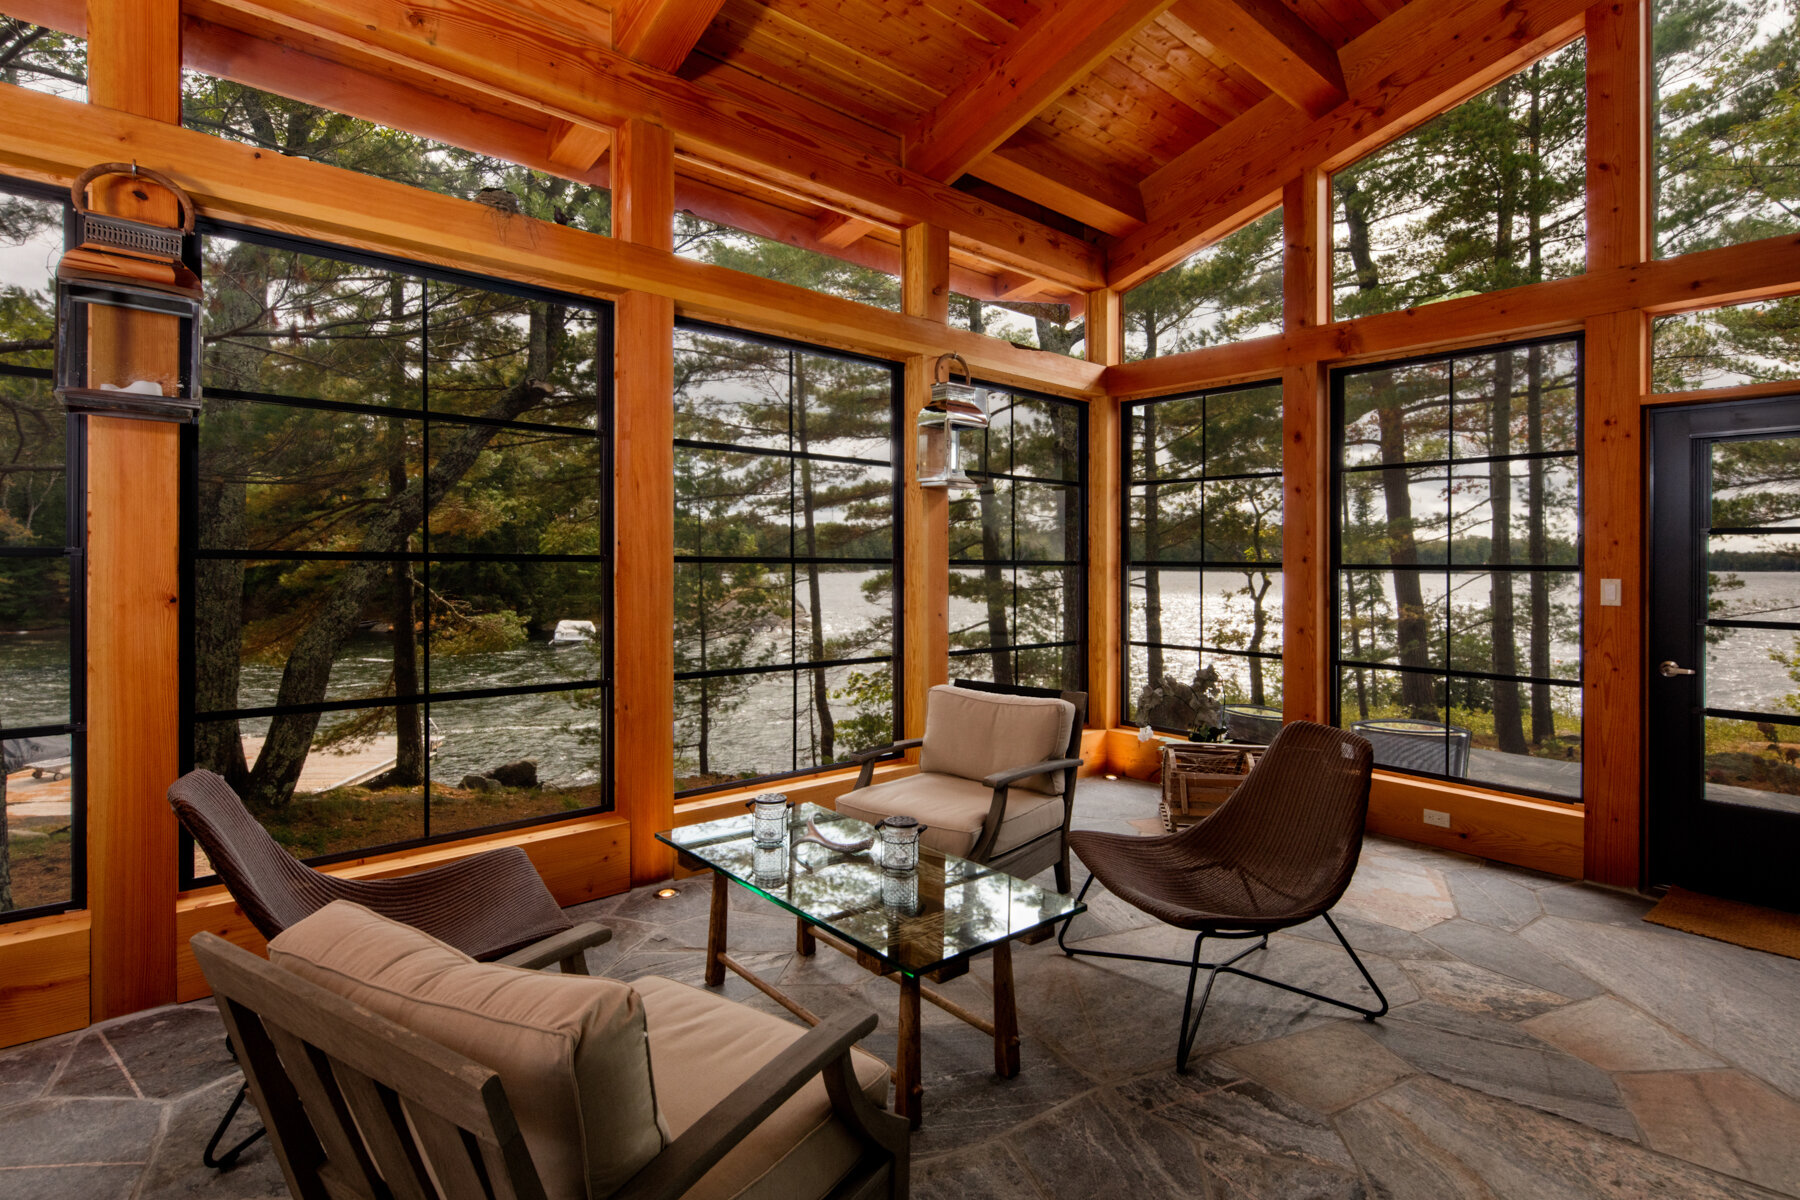 The Projects That Made Us: Contemporary Rustic on Muskoka Lake 7